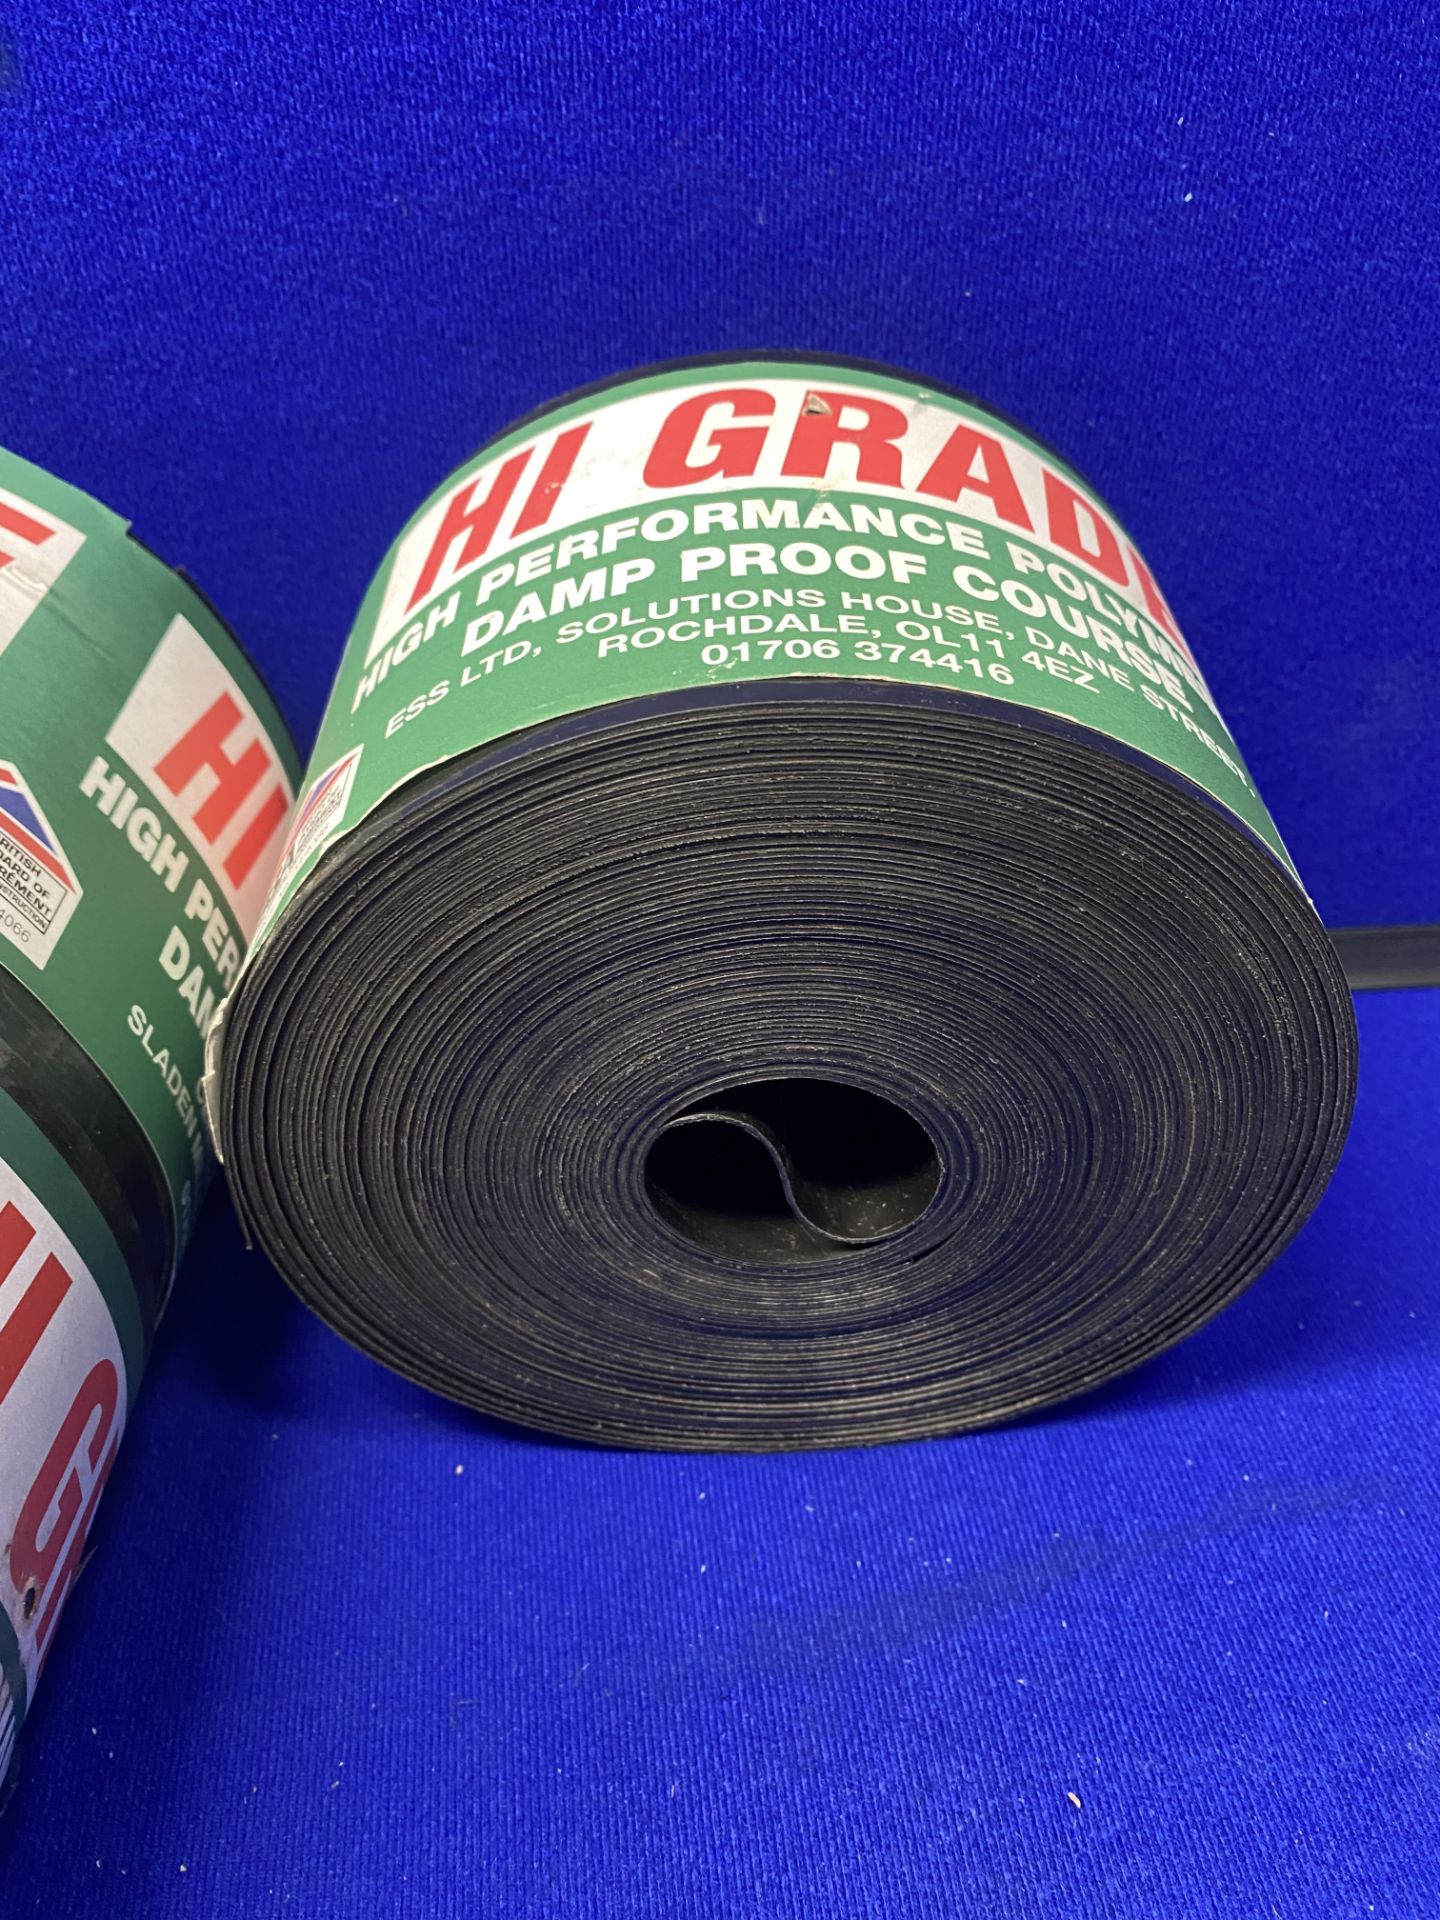 9 x Rolls Of Various Sized Hi Grade High Performance Polymeric Damp Proof Course As Seen On Photos - Image 14 of 14